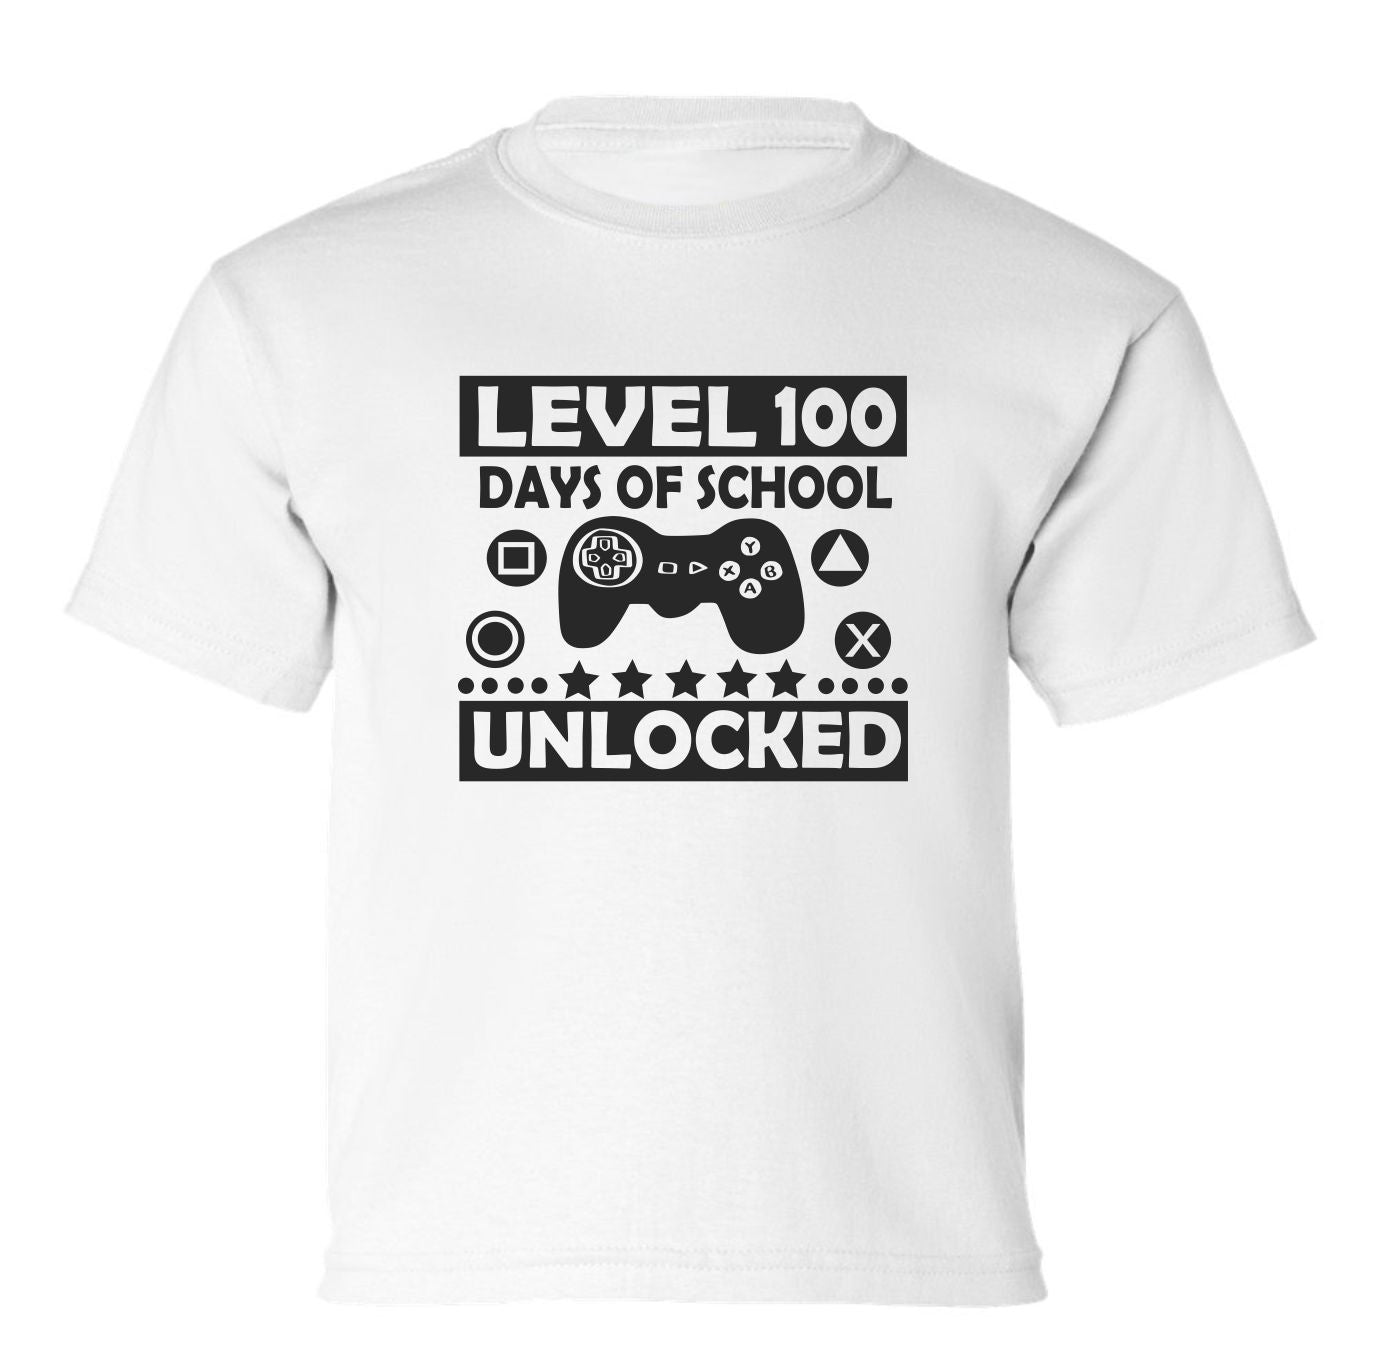 "Level 100 Unlocked" (100 Days Of School) Toddler/Youth T-Shirt